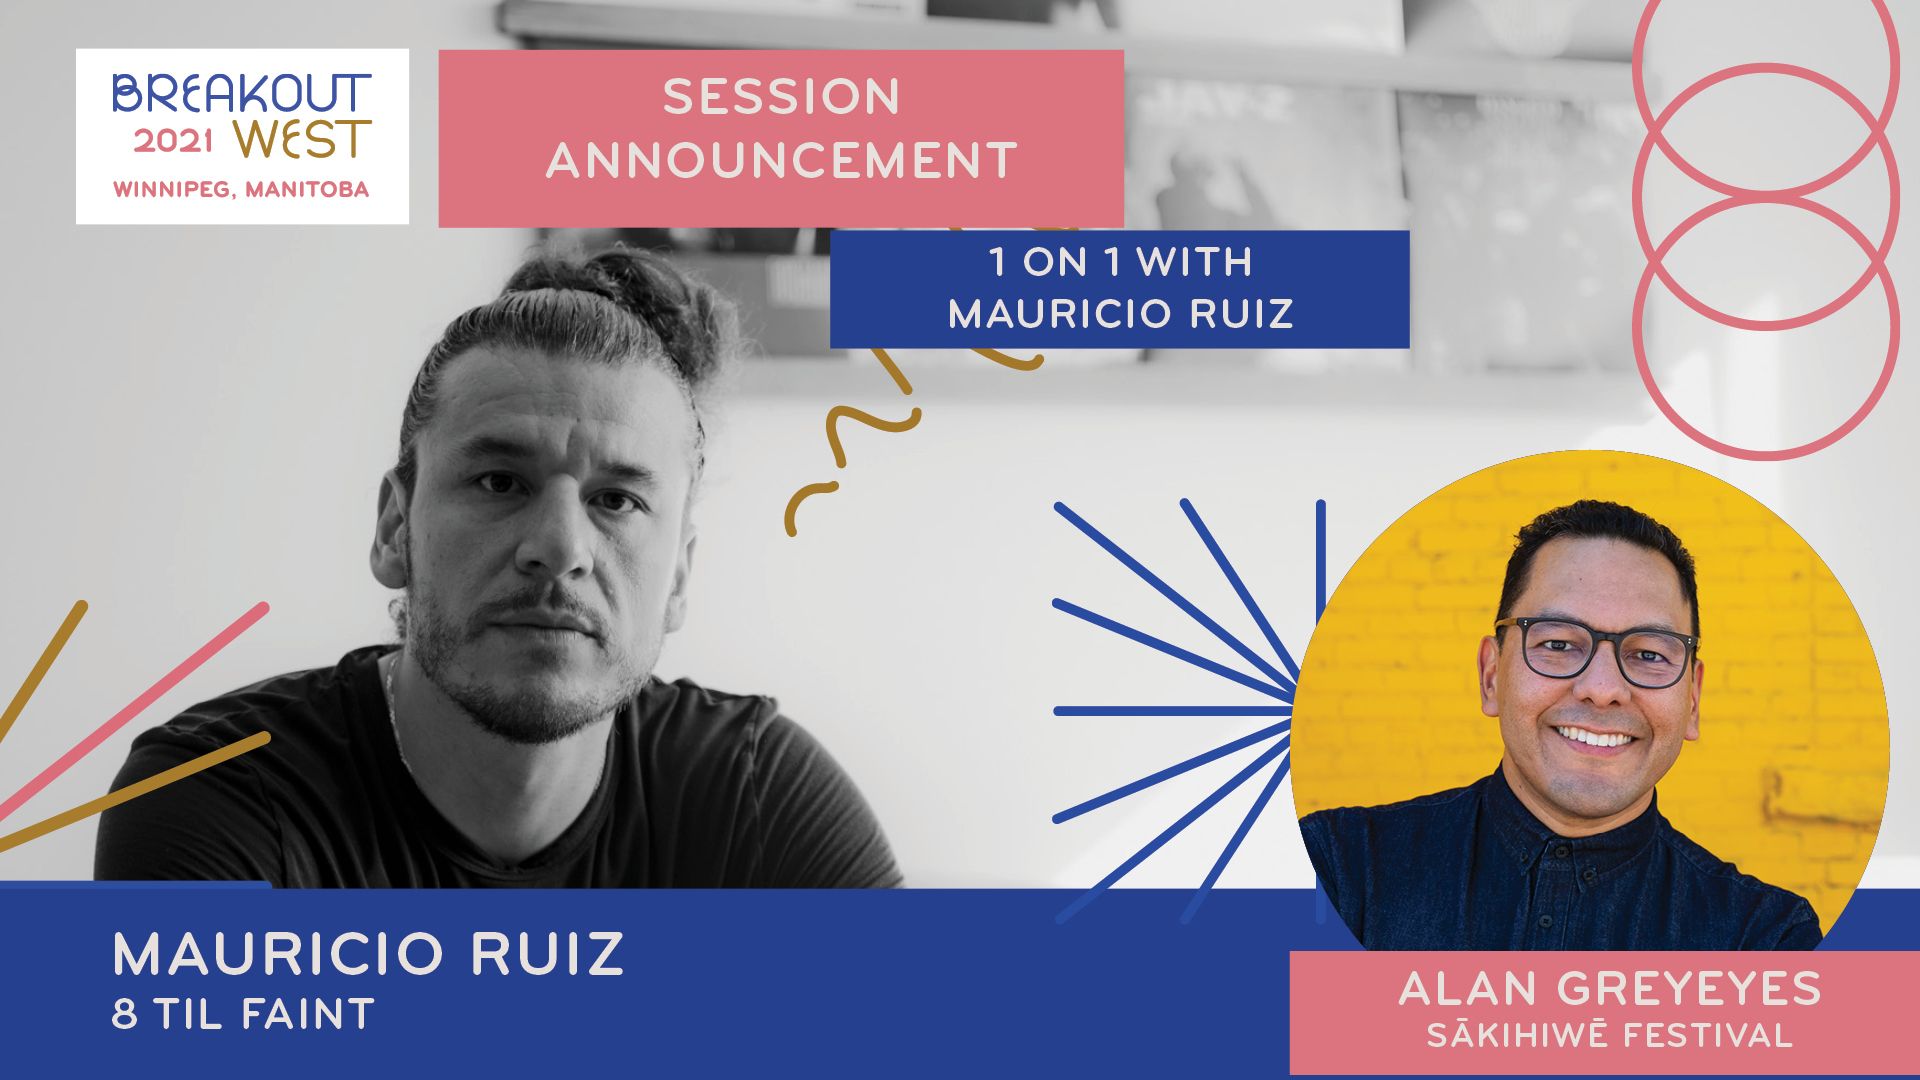 Session Announcement - 1 on 1 with Mauricio Ruiz